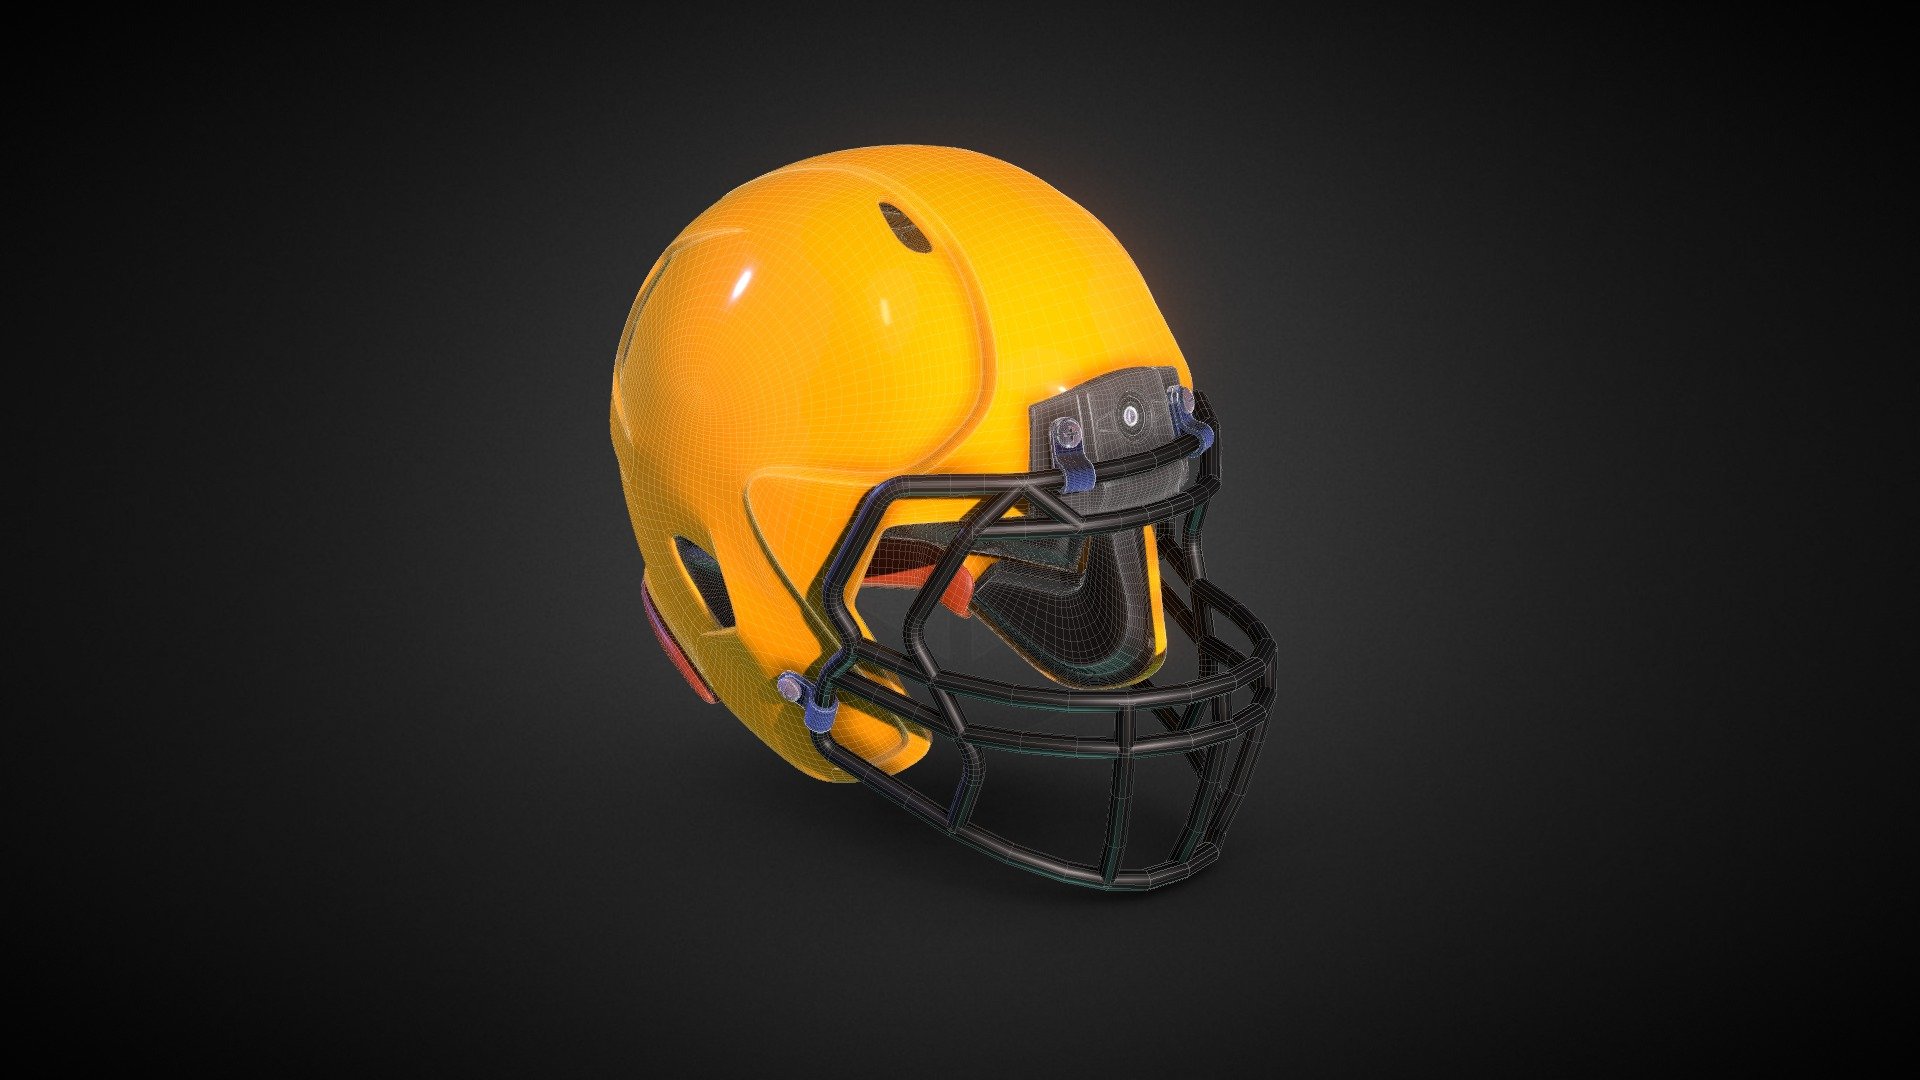 New version of my old model American football helmet.
Features:
UV Mapped
Quad poly only
Front guard totallly remeshed
Foam inside the helmet remeshed - American football helmet - Remeshed - UV Mapped - Buy Royalty Free 3D model by LURA (@lura_art) 3d model